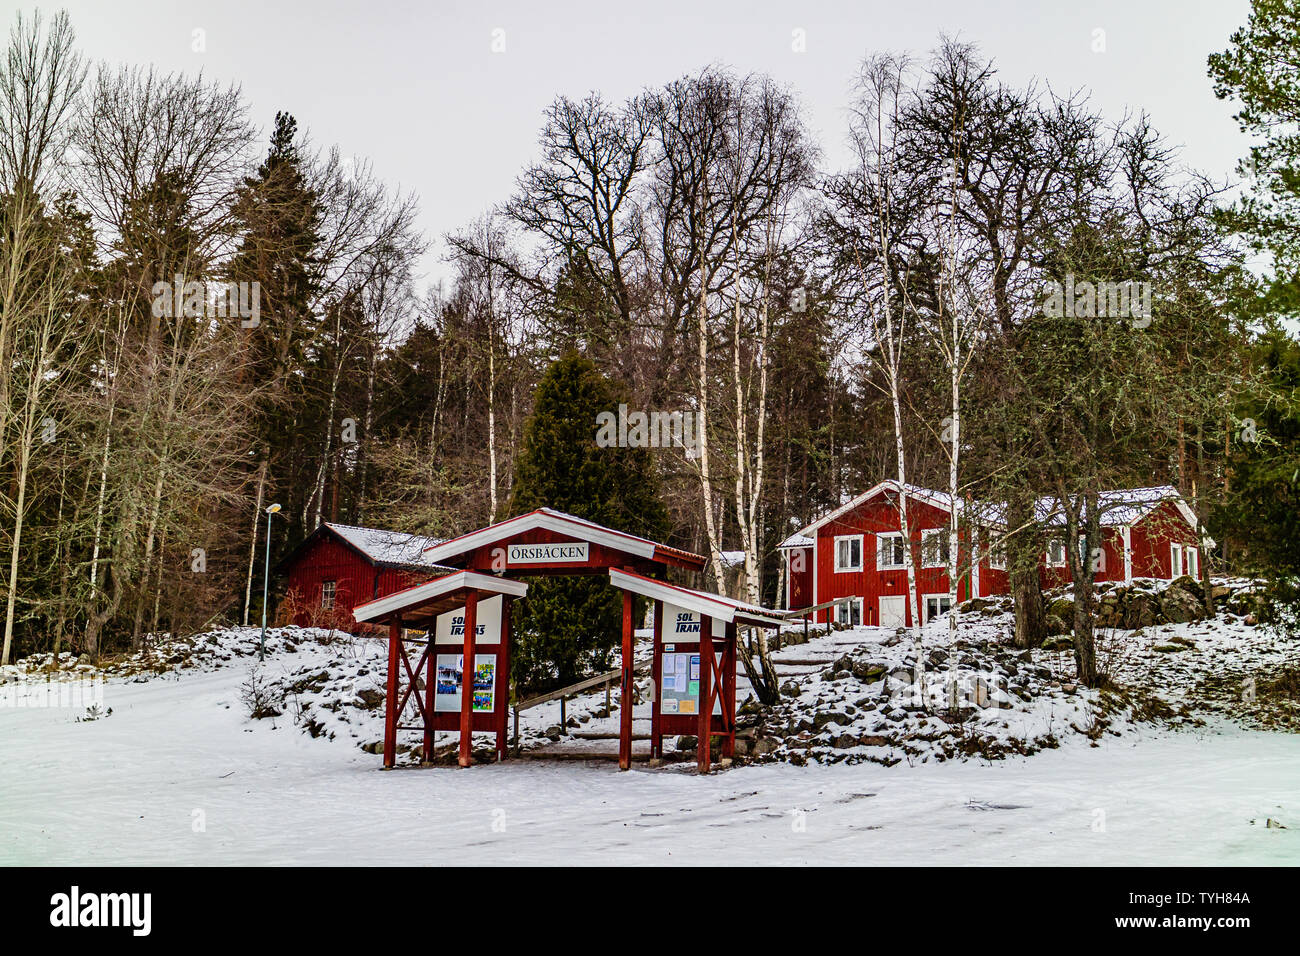 The Orsbacken clubhouse for SOL Tranas, a skiing and orienteering club in the Illernomradet Nature Reserve, Tranas, Smaland, Sweden. January 2019. Stock Photo